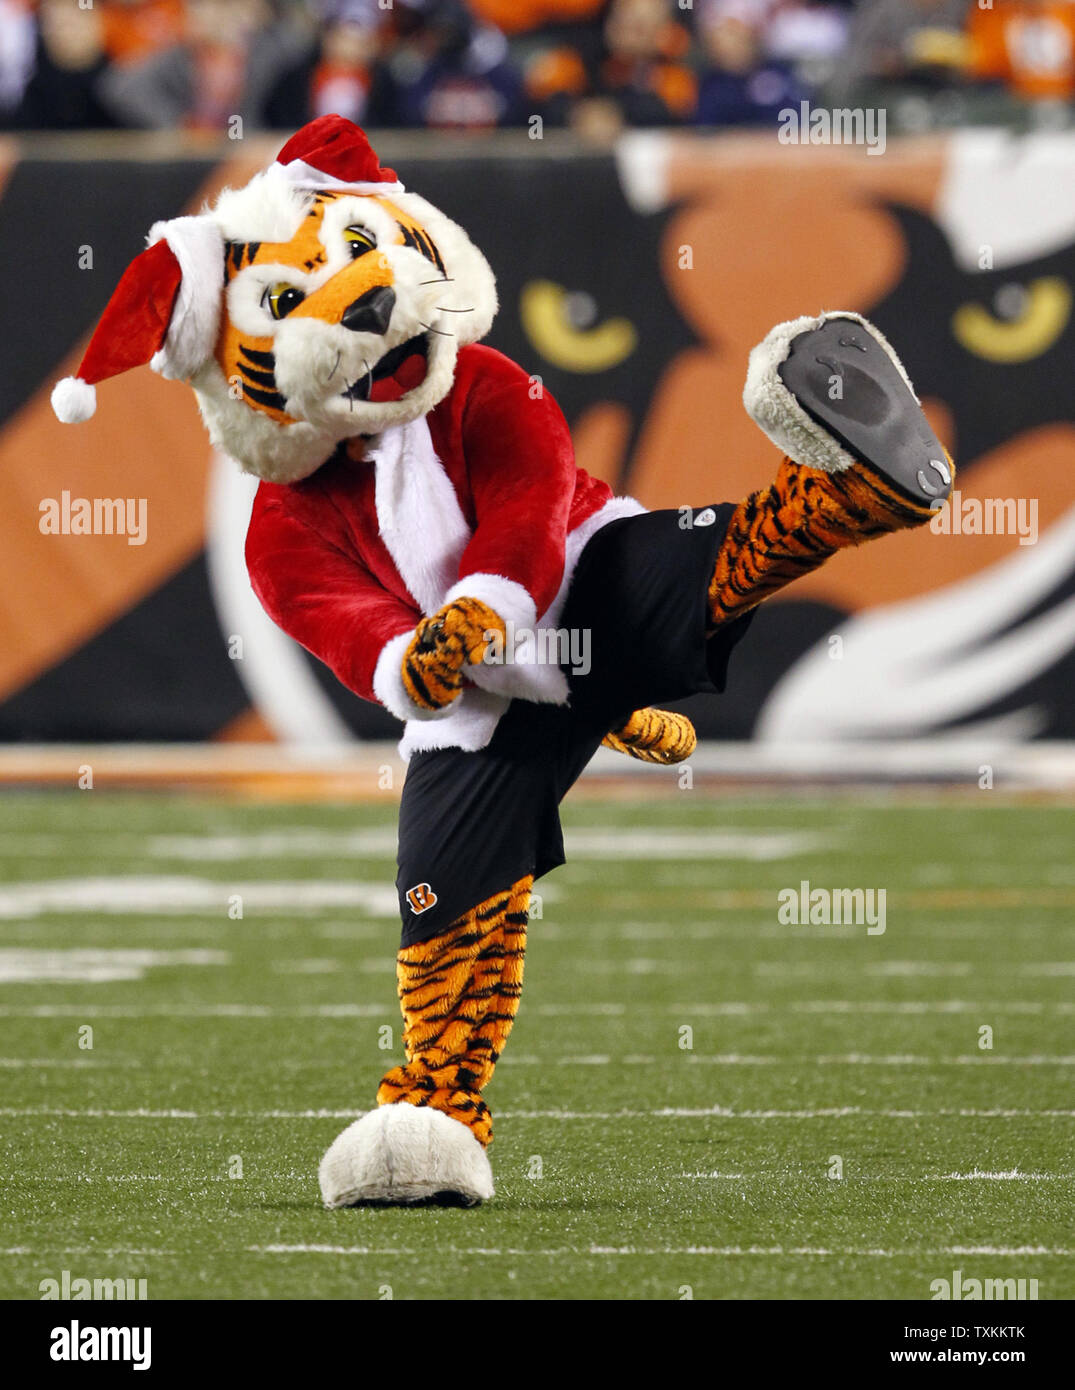 The Cincinnati Bengals mascot shows his holiday spirit as he cheers for the team against Denver Broncos in their NFL football game at Paul Brown Stadium in Cincinnati, Ohio, December 22, 2014.    UPI /John Sommers II Stock Photo